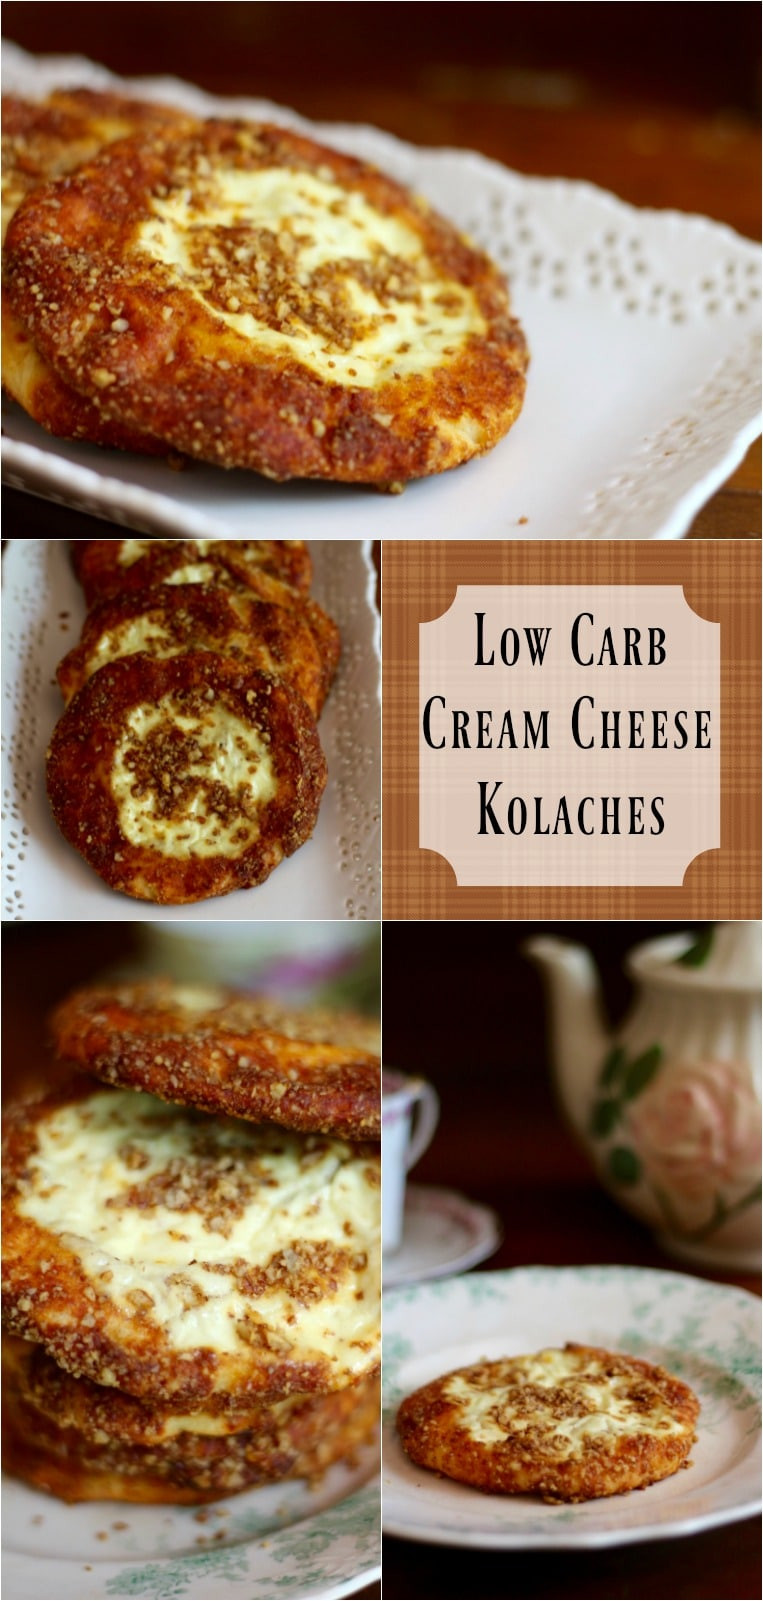 Low Carb Cream Cheese Recipes
 Low Carb Cream Cheese Kolaches Recipe lowcarb ology